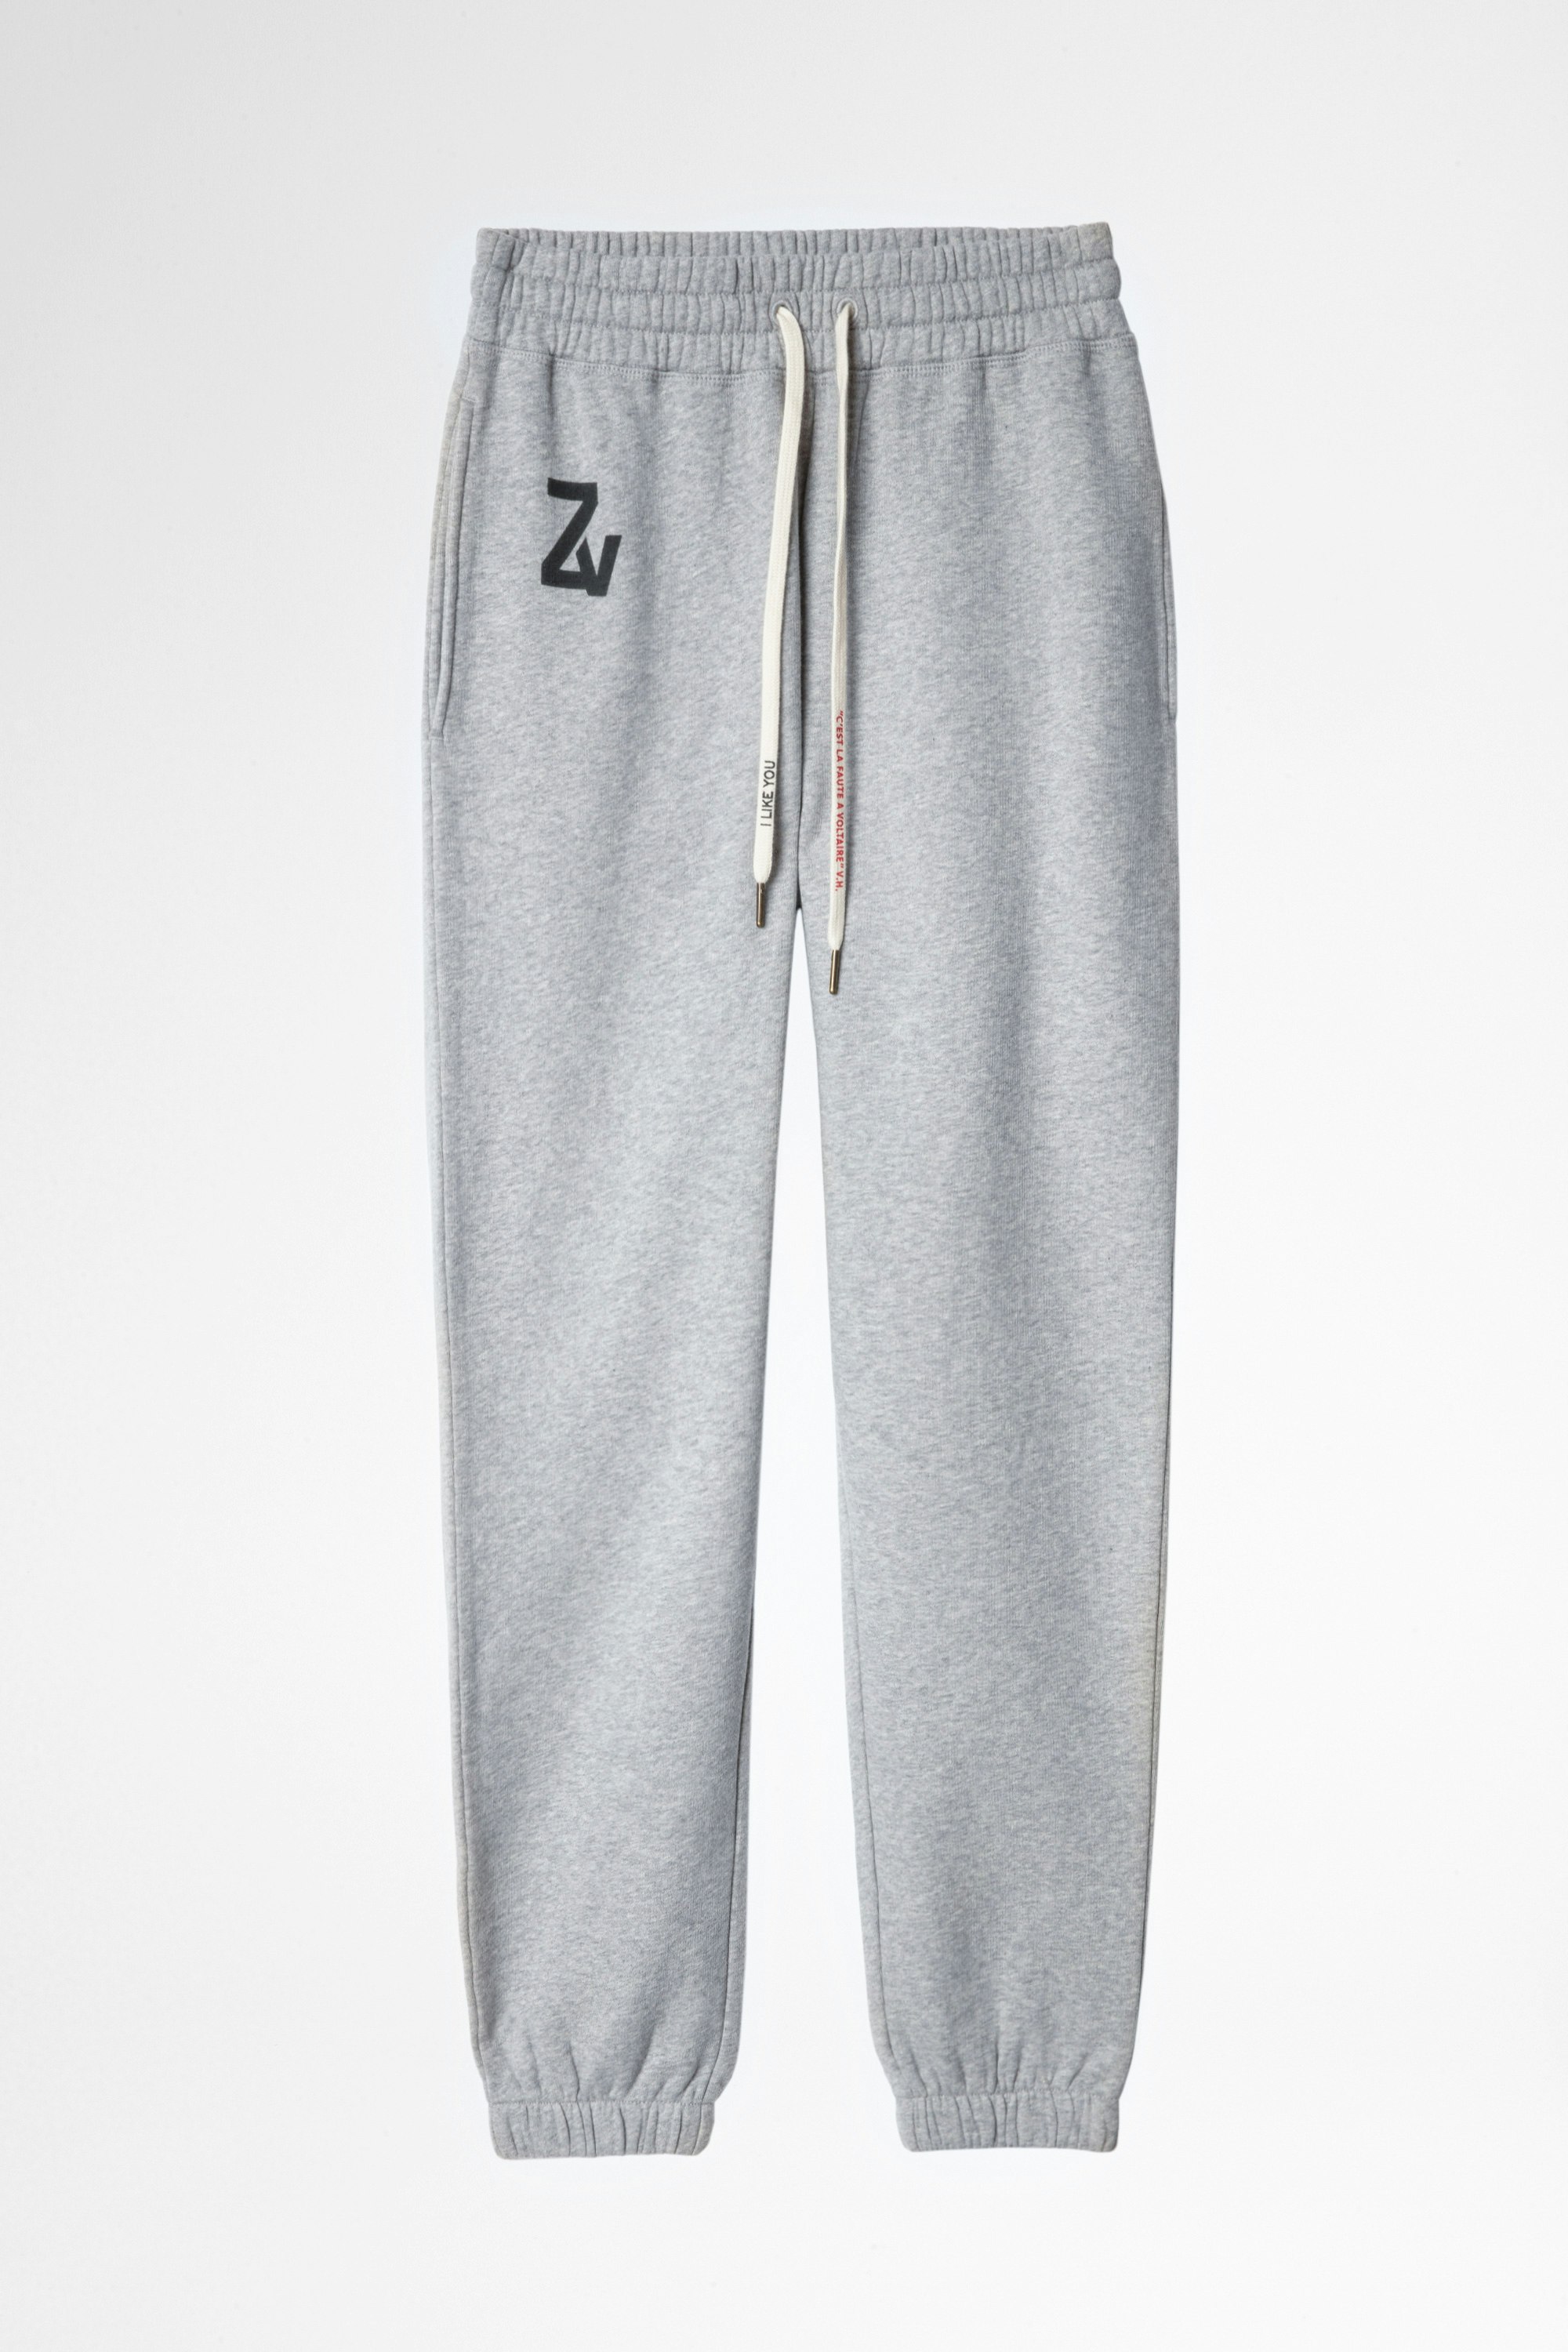 Steevy Trackpants Woman’s flecked grey tracksuit bottoms